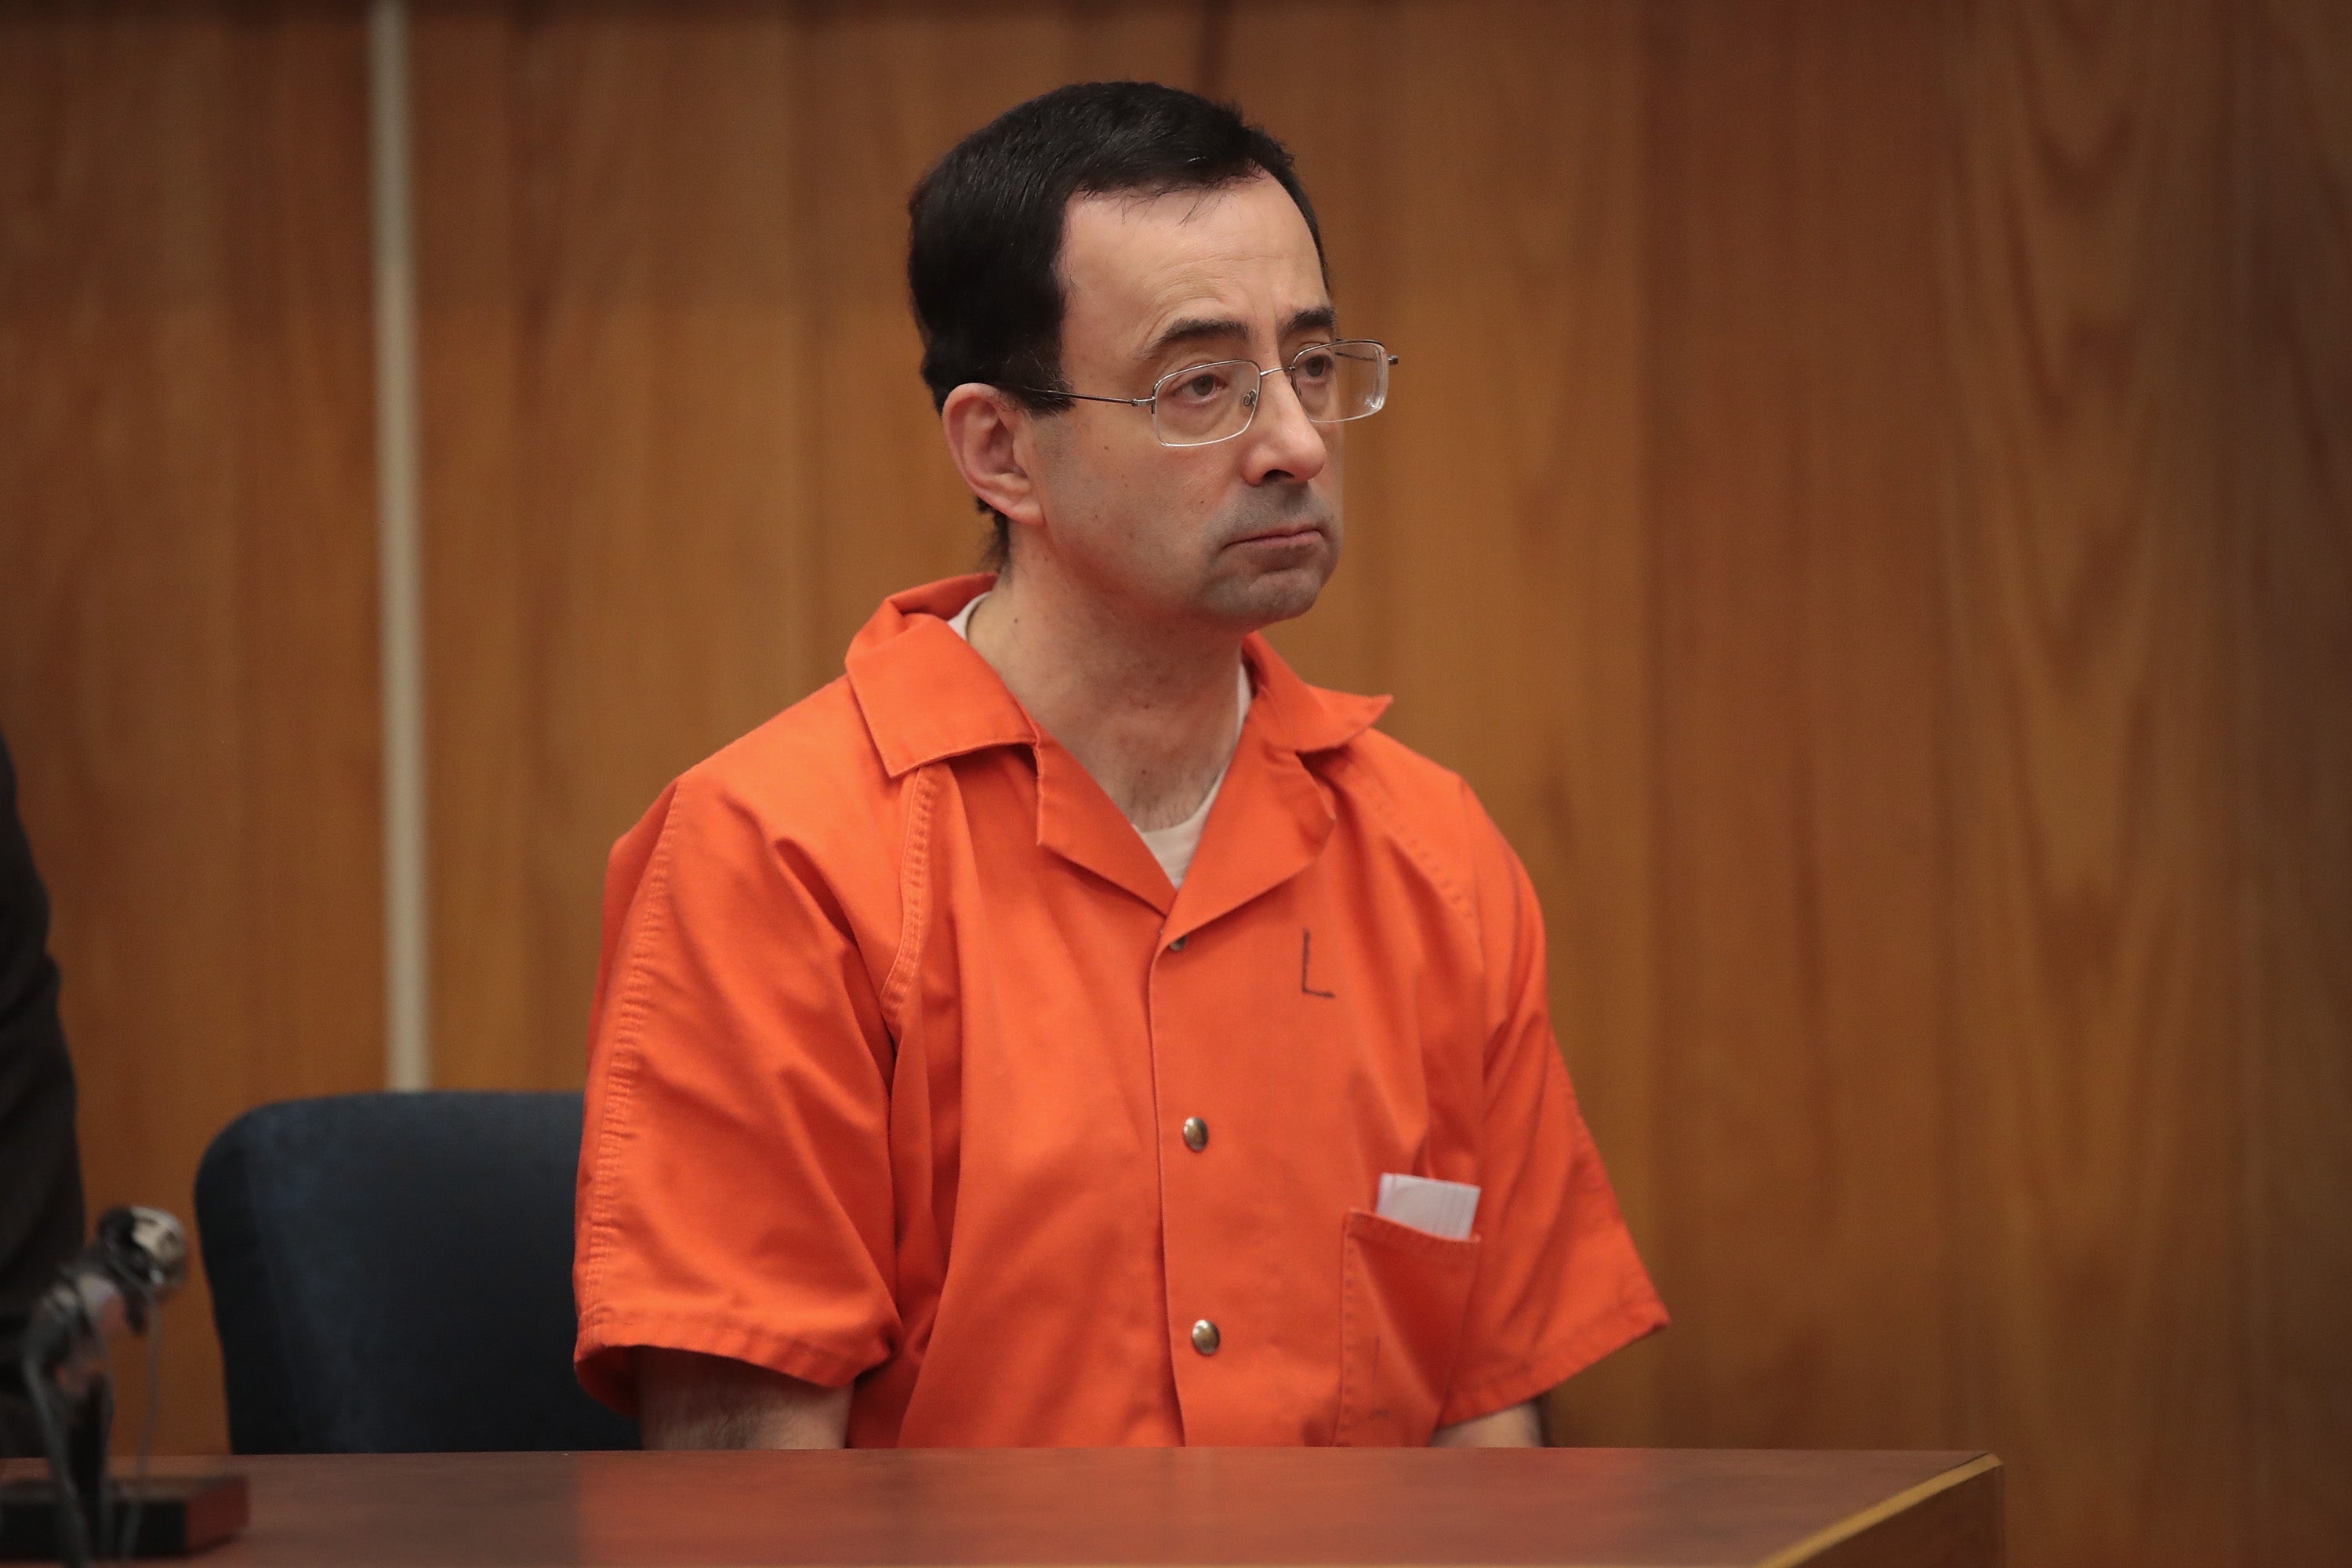 Larry Nassar sits in court listening to statements before being sentenced by Judge Janice Cunningham for three counts of criminal sexual assault in Eaton County Circuit Court on February 5, 2018